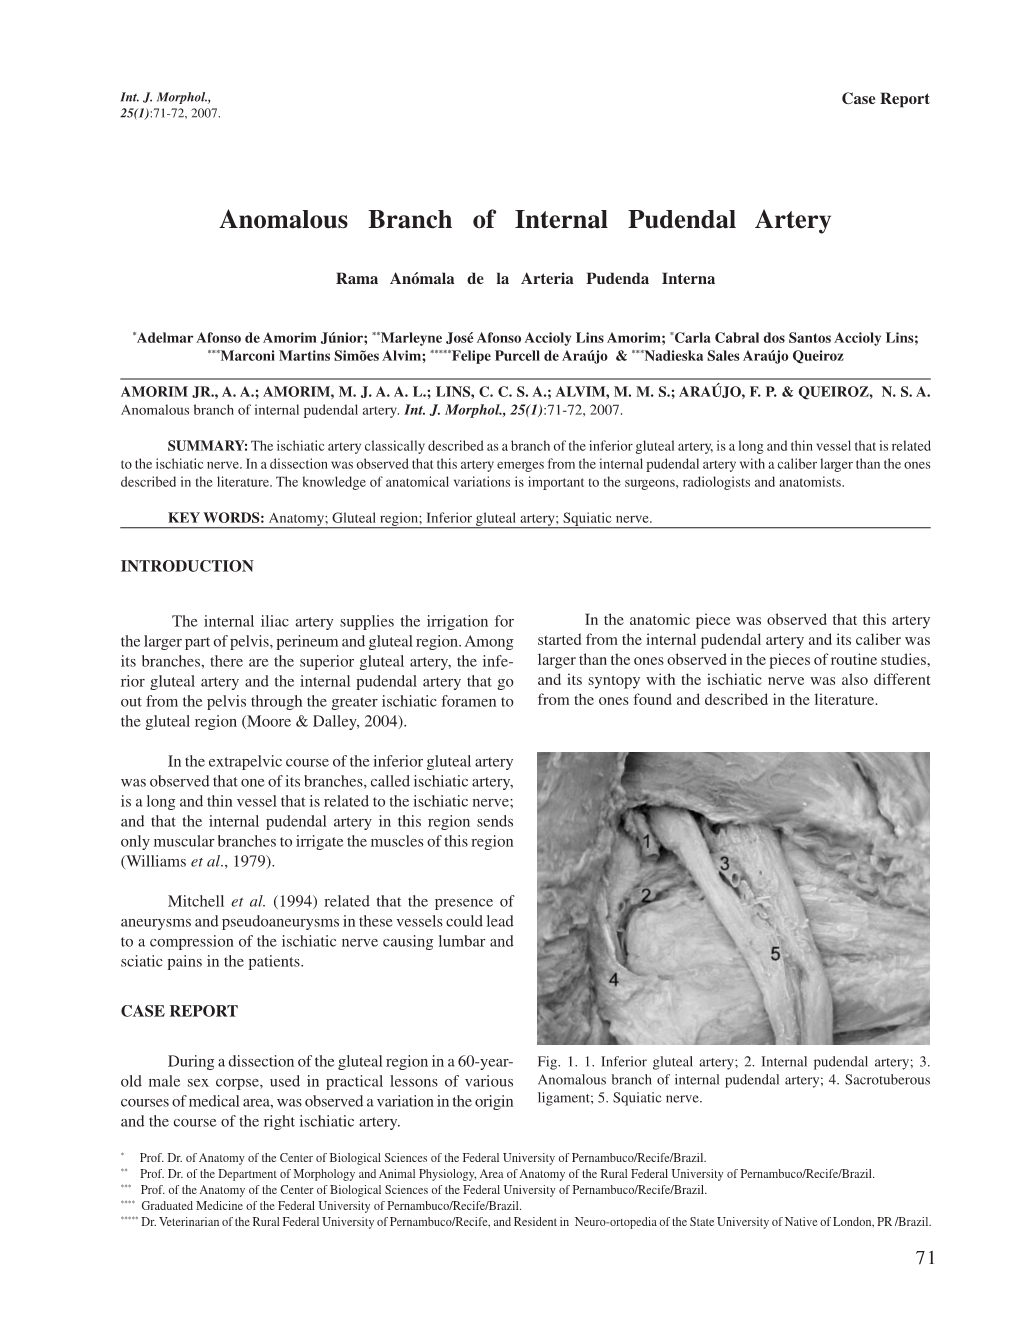 Anomalous Branch of Internal Pudendal Artery